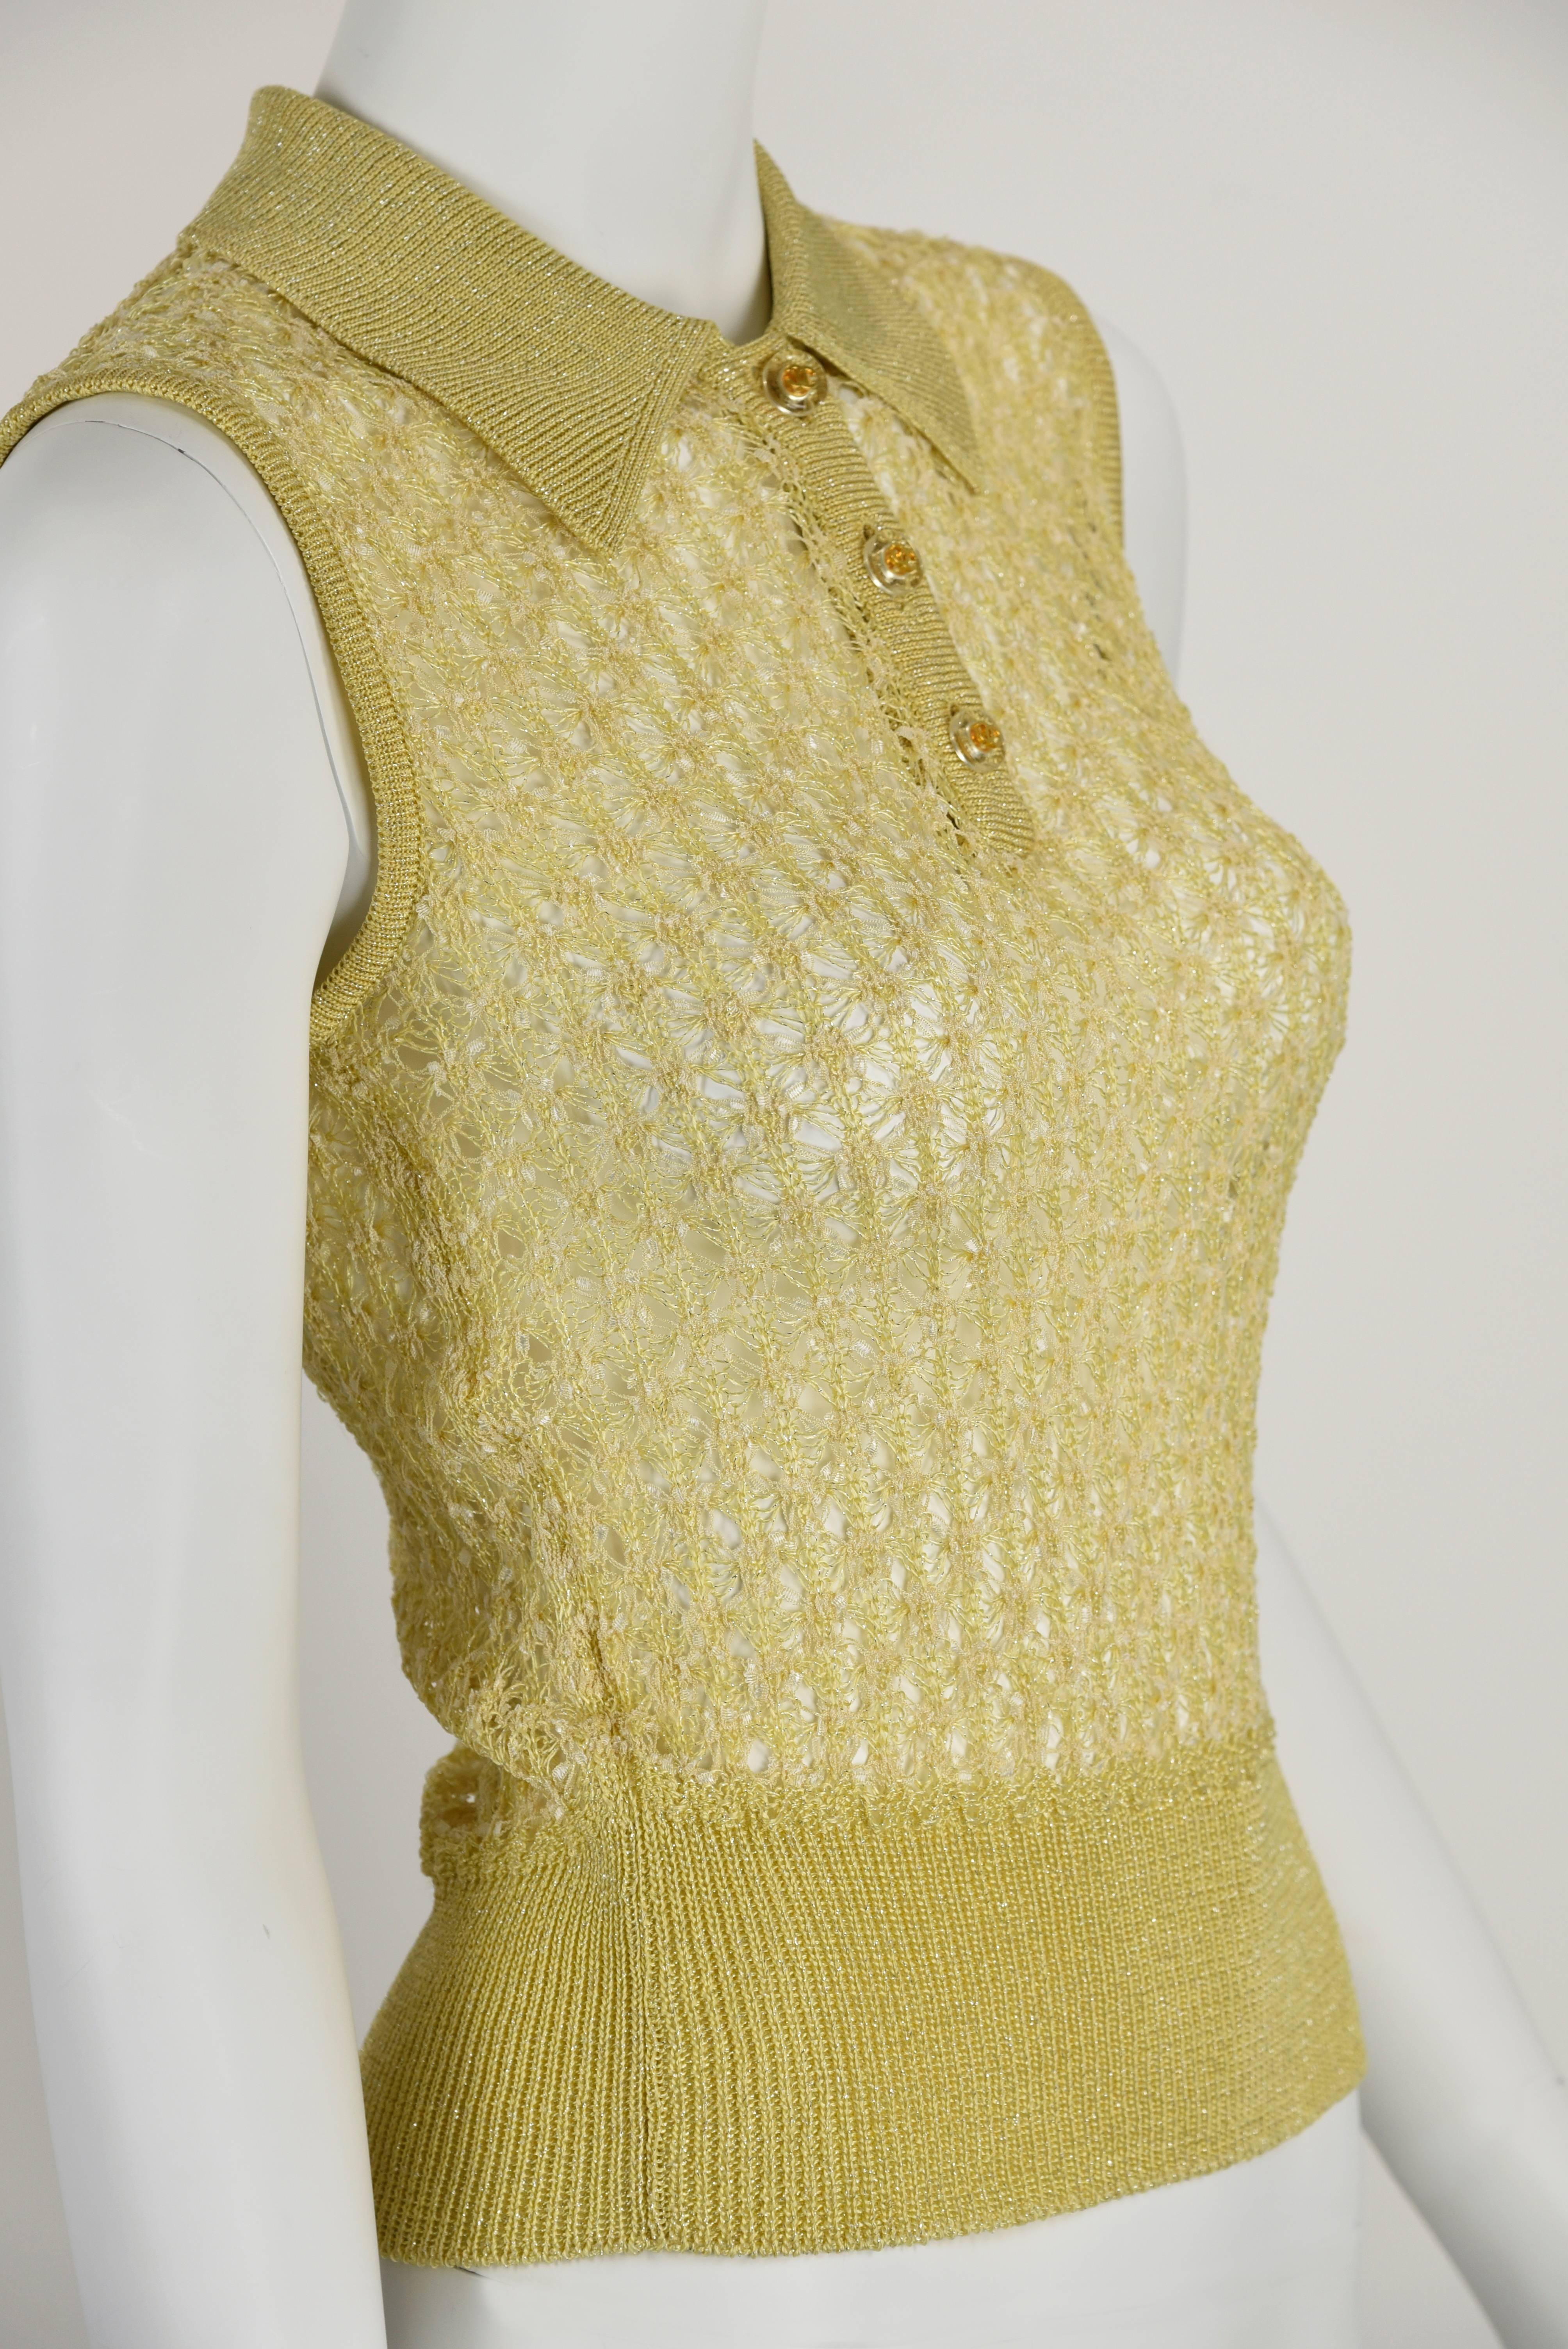 A charming summer top that adds interest and sparkle to a suit, skirt or pants.
Fabric is 36% acetate, 36% rayon 22% nylon and 6% polyester.  Buttons are clear with gold CCs.
Chanel#P07785V00360 